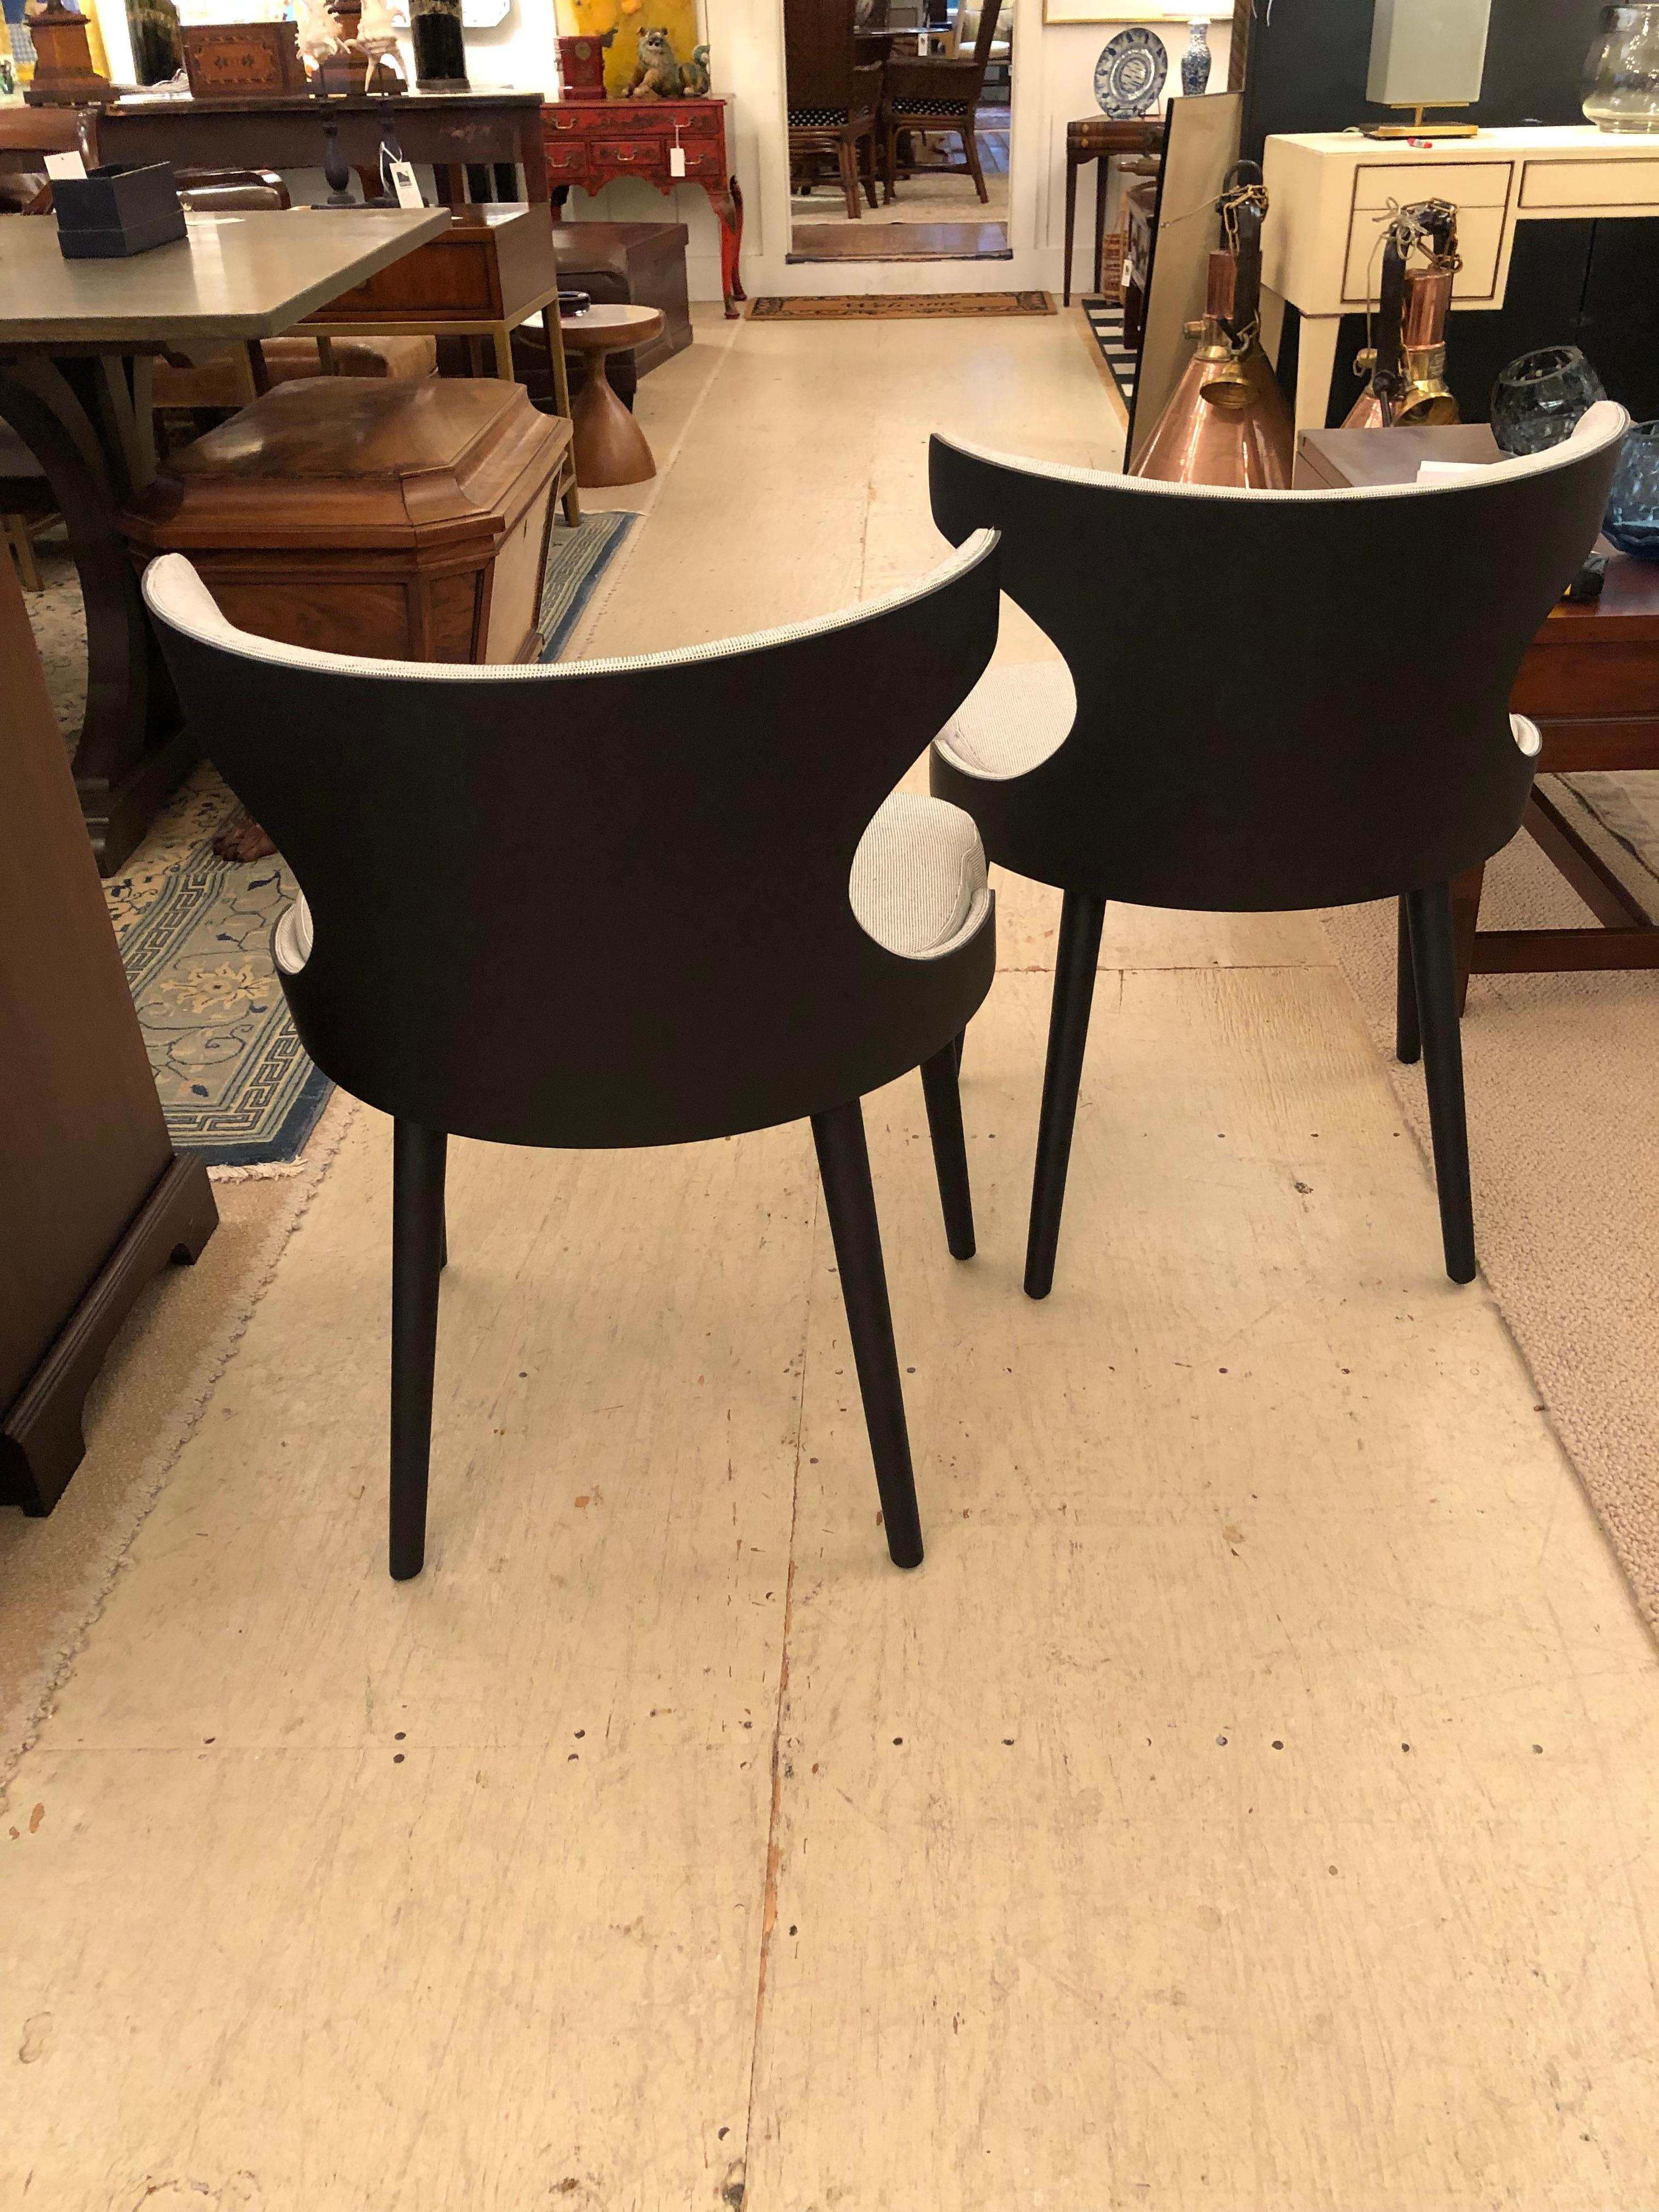 Super chic sculptural pair of modern Italian chairs with wonderful shapely black backs and legs, with tailored neutral upholstery on the fronts. Seat cushion is attached.
Measures: Seat height 19 seat depth 17.
 